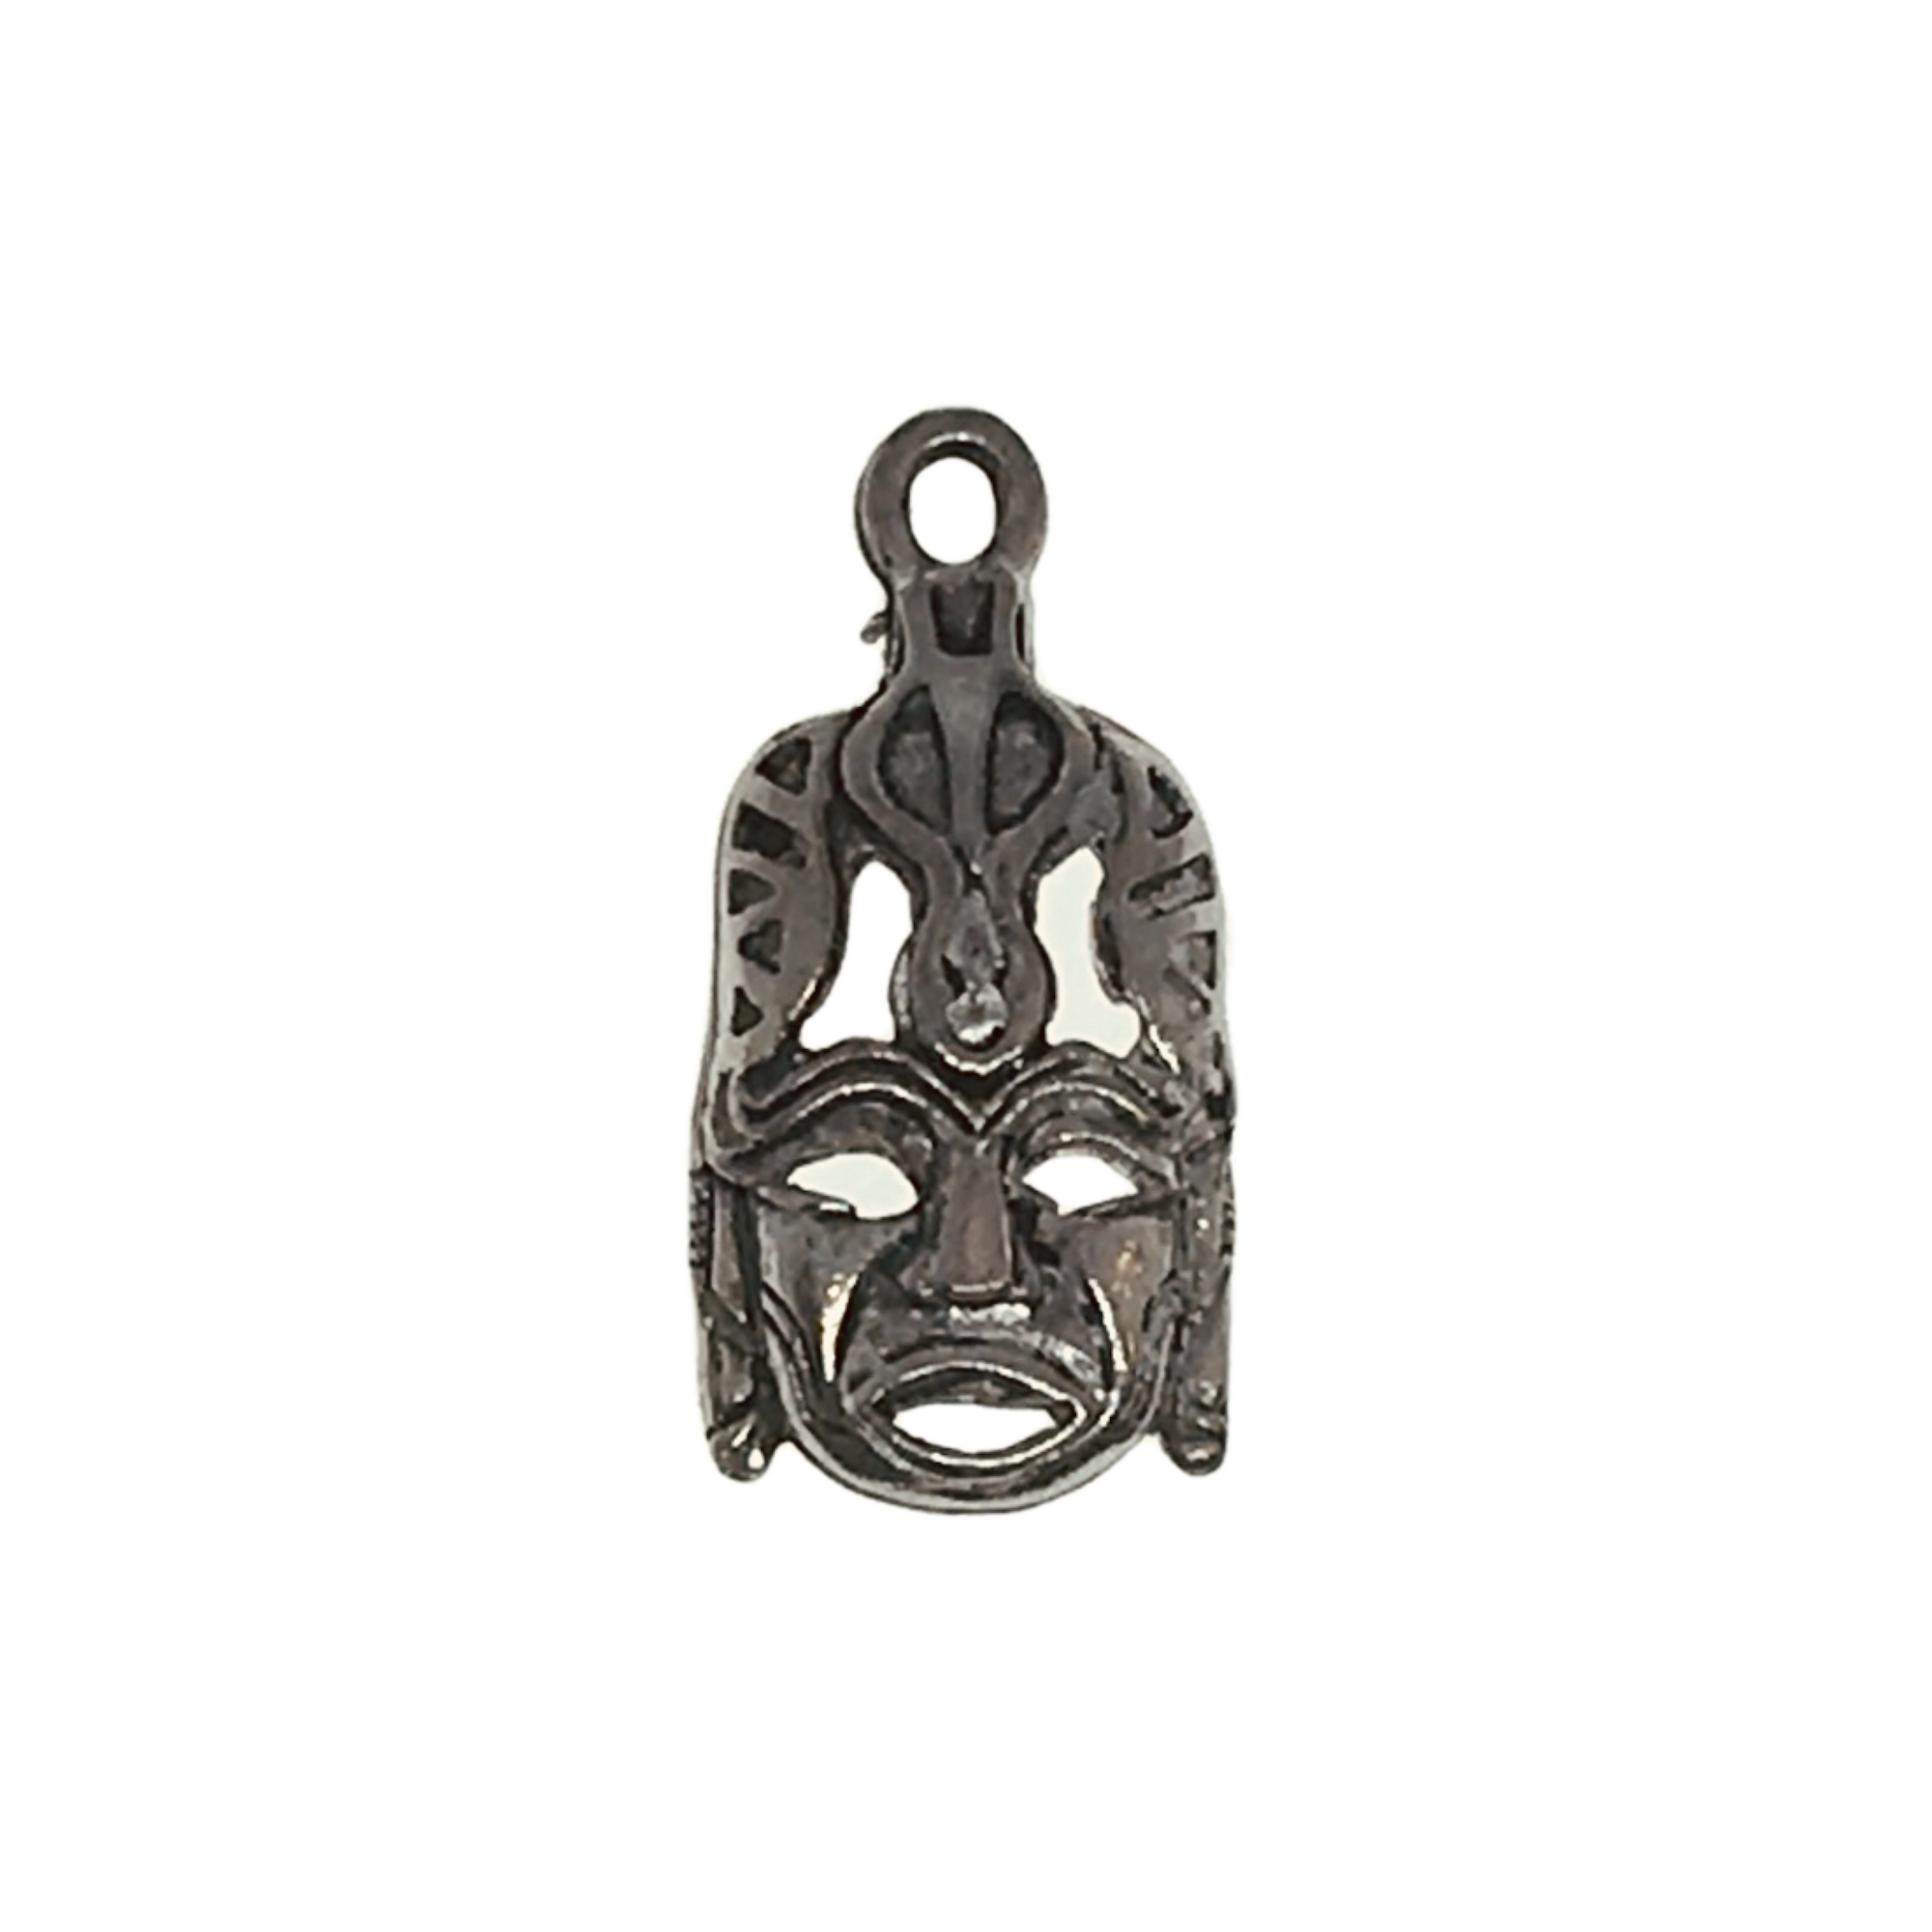 Safari Tribal Mask Charms - Qty of 5 Charms -Lead Free Pewter Silver - American Made